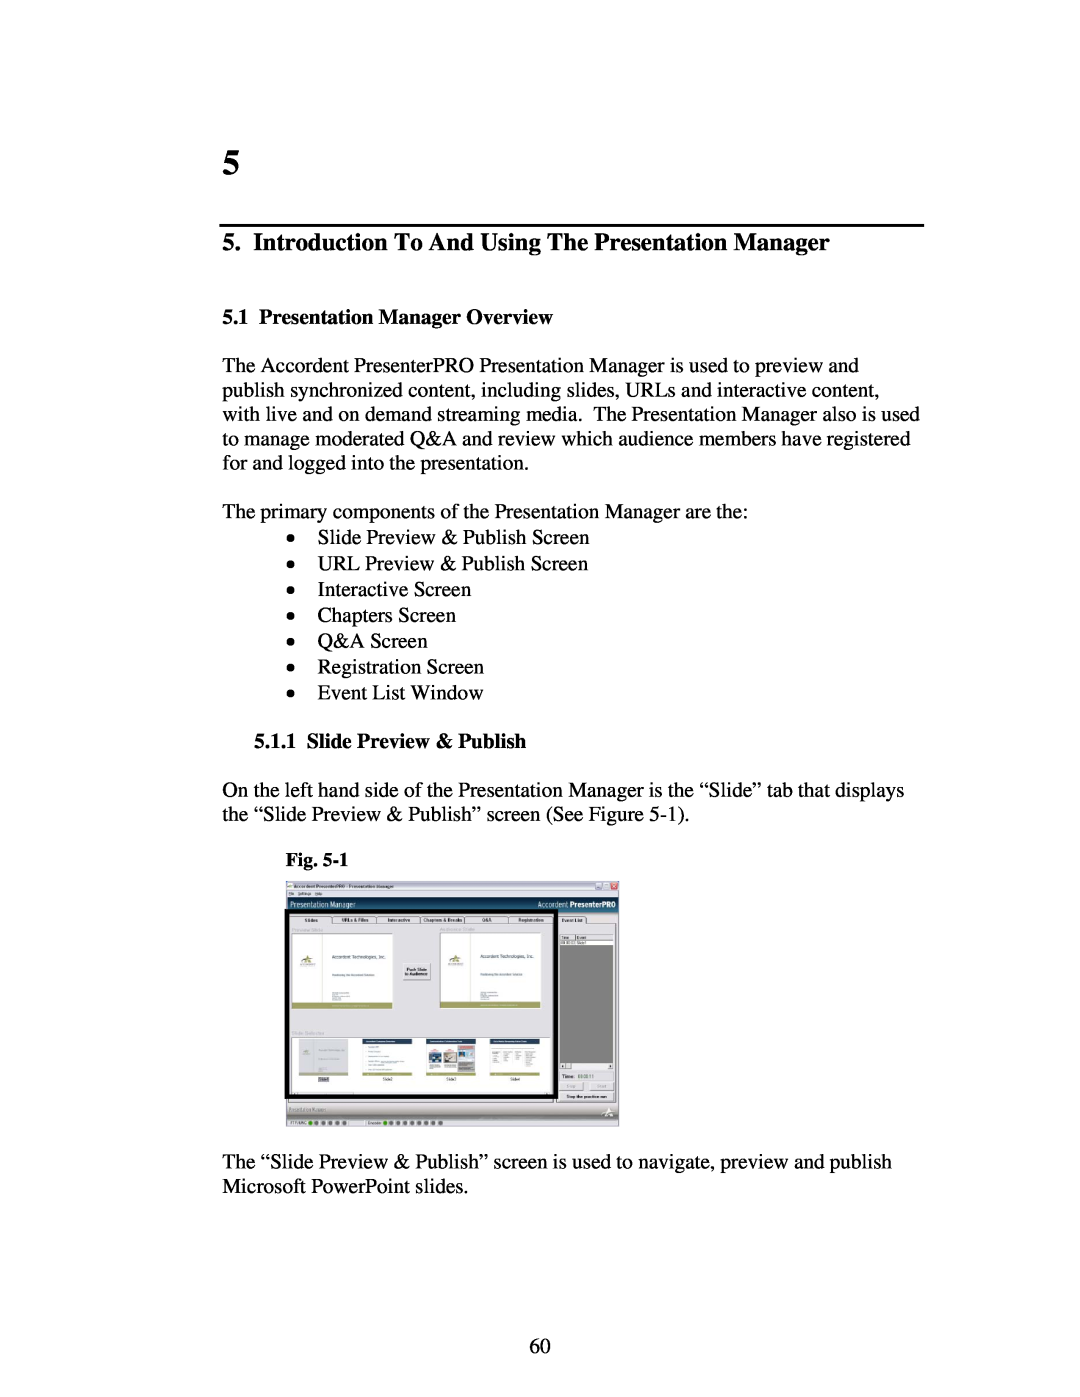 Polycom 6.1 Introduction To And Using The Presentation Manager, Presentation Manager Overview, Slide Preview & Publish 